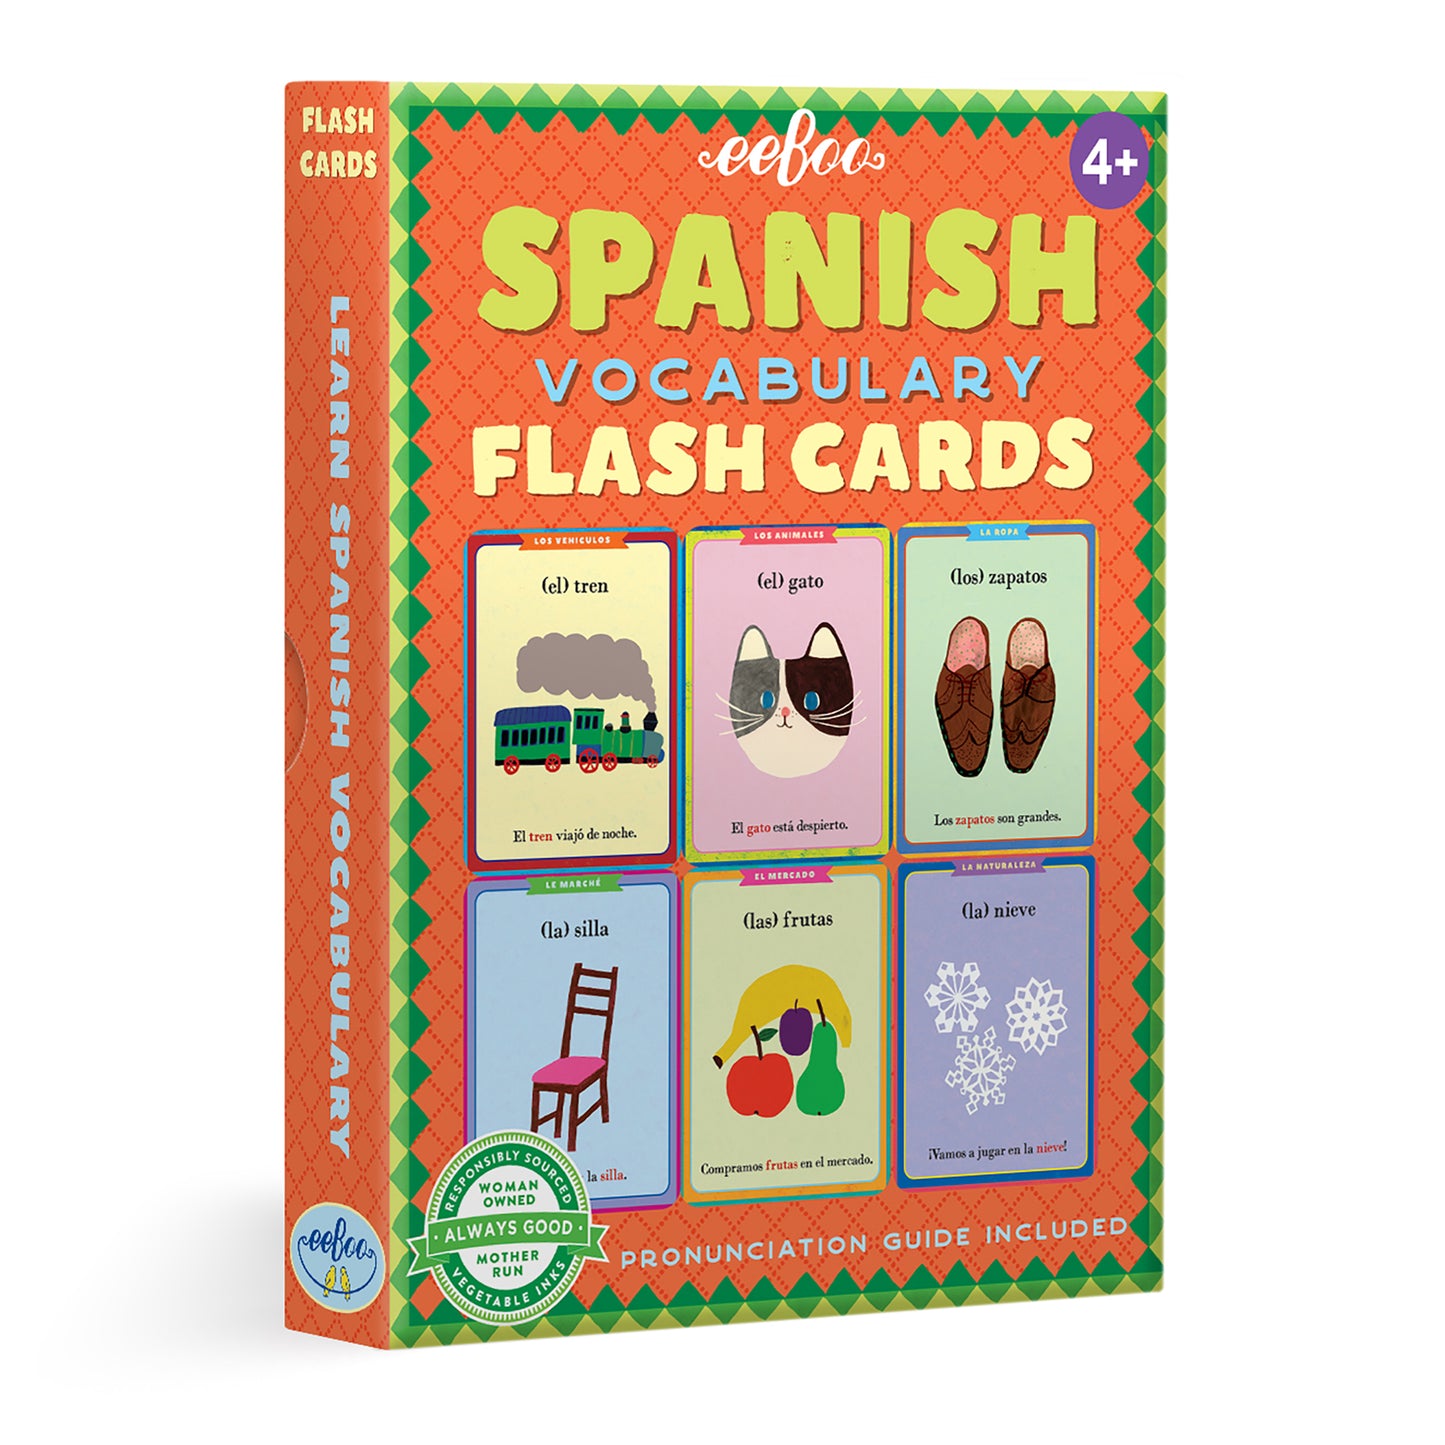 Spanish Vocabulary Flash Cards Educational Language Learning by eeBoo for Kids 4+